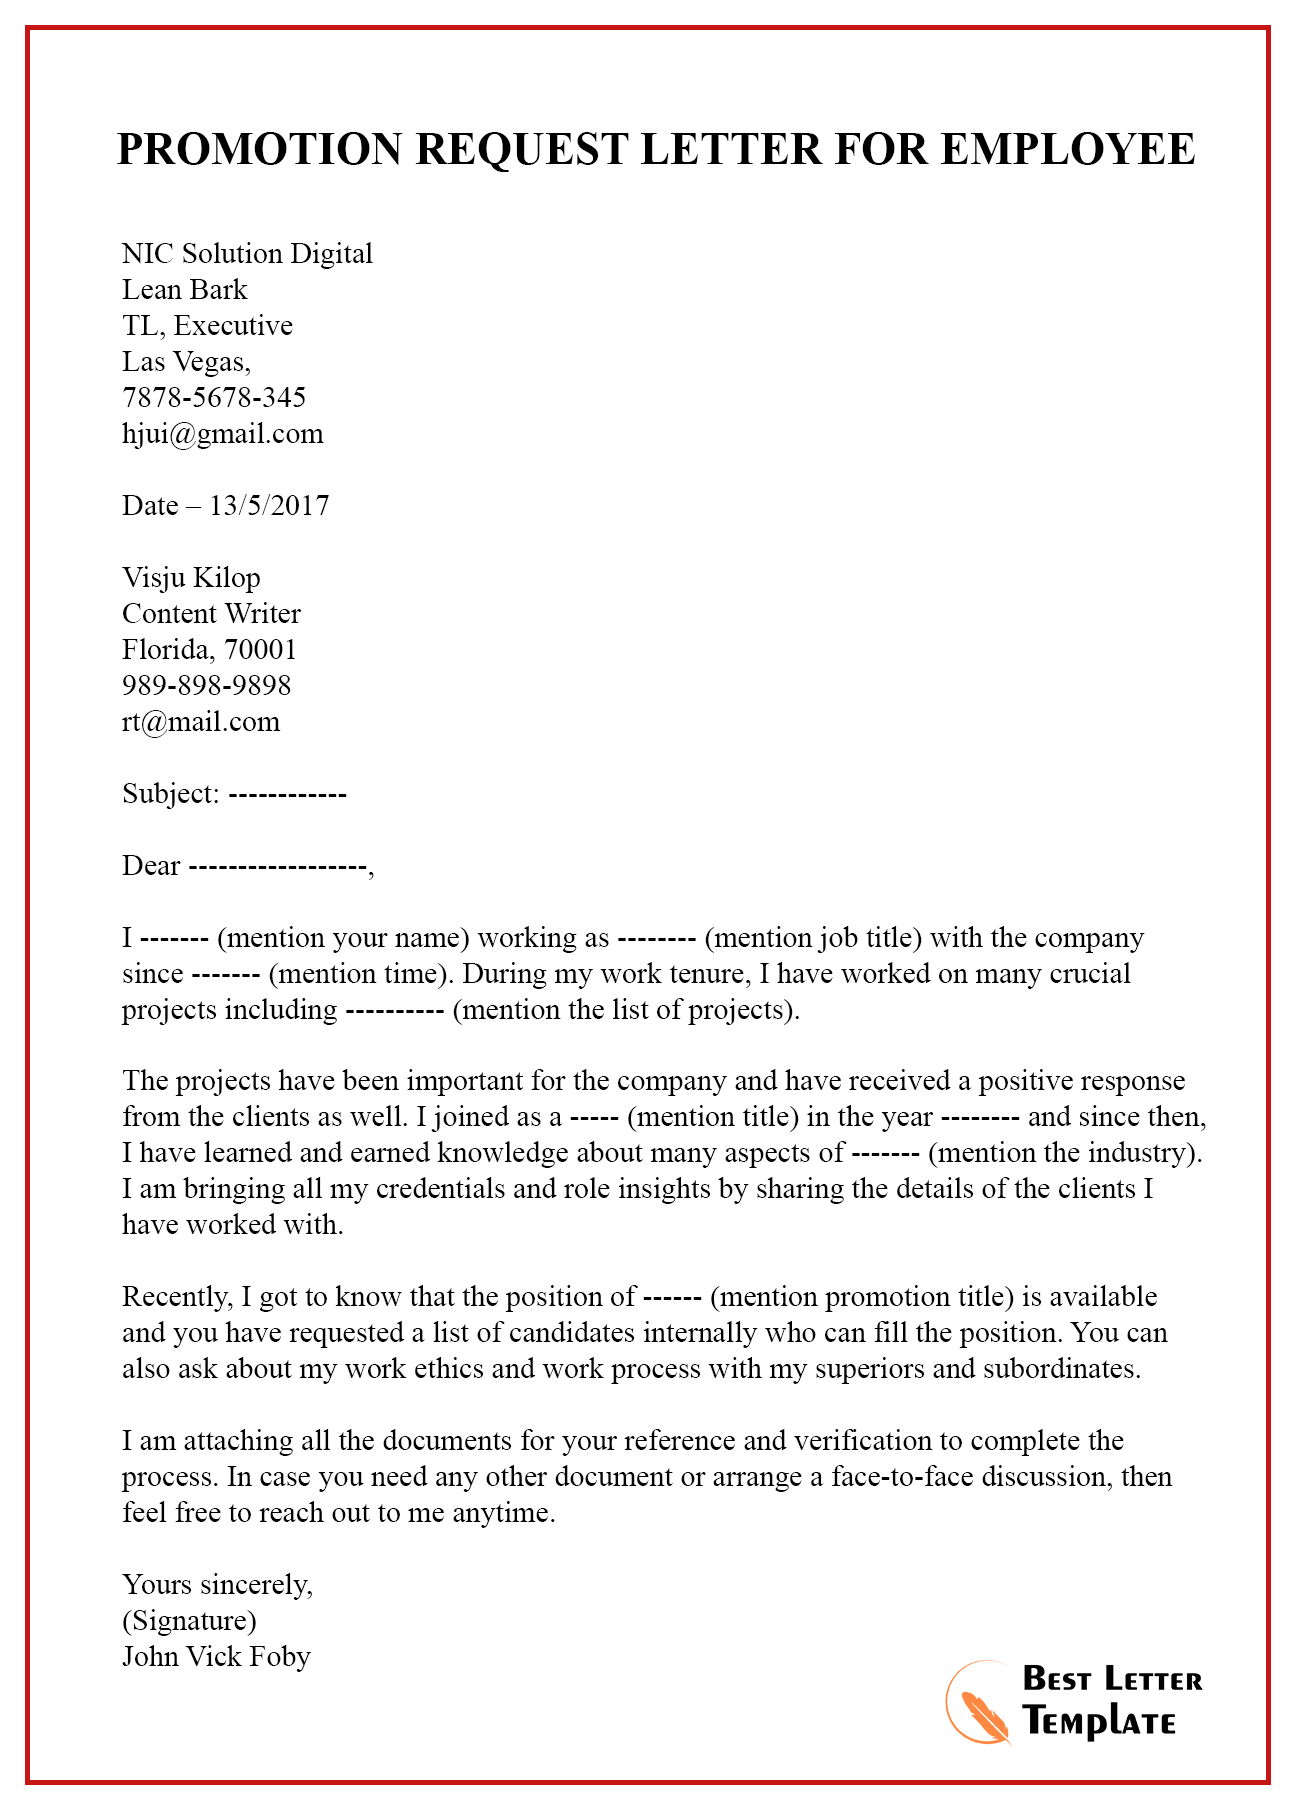 Promotion Request Letter Template from bestlettertemplate.com